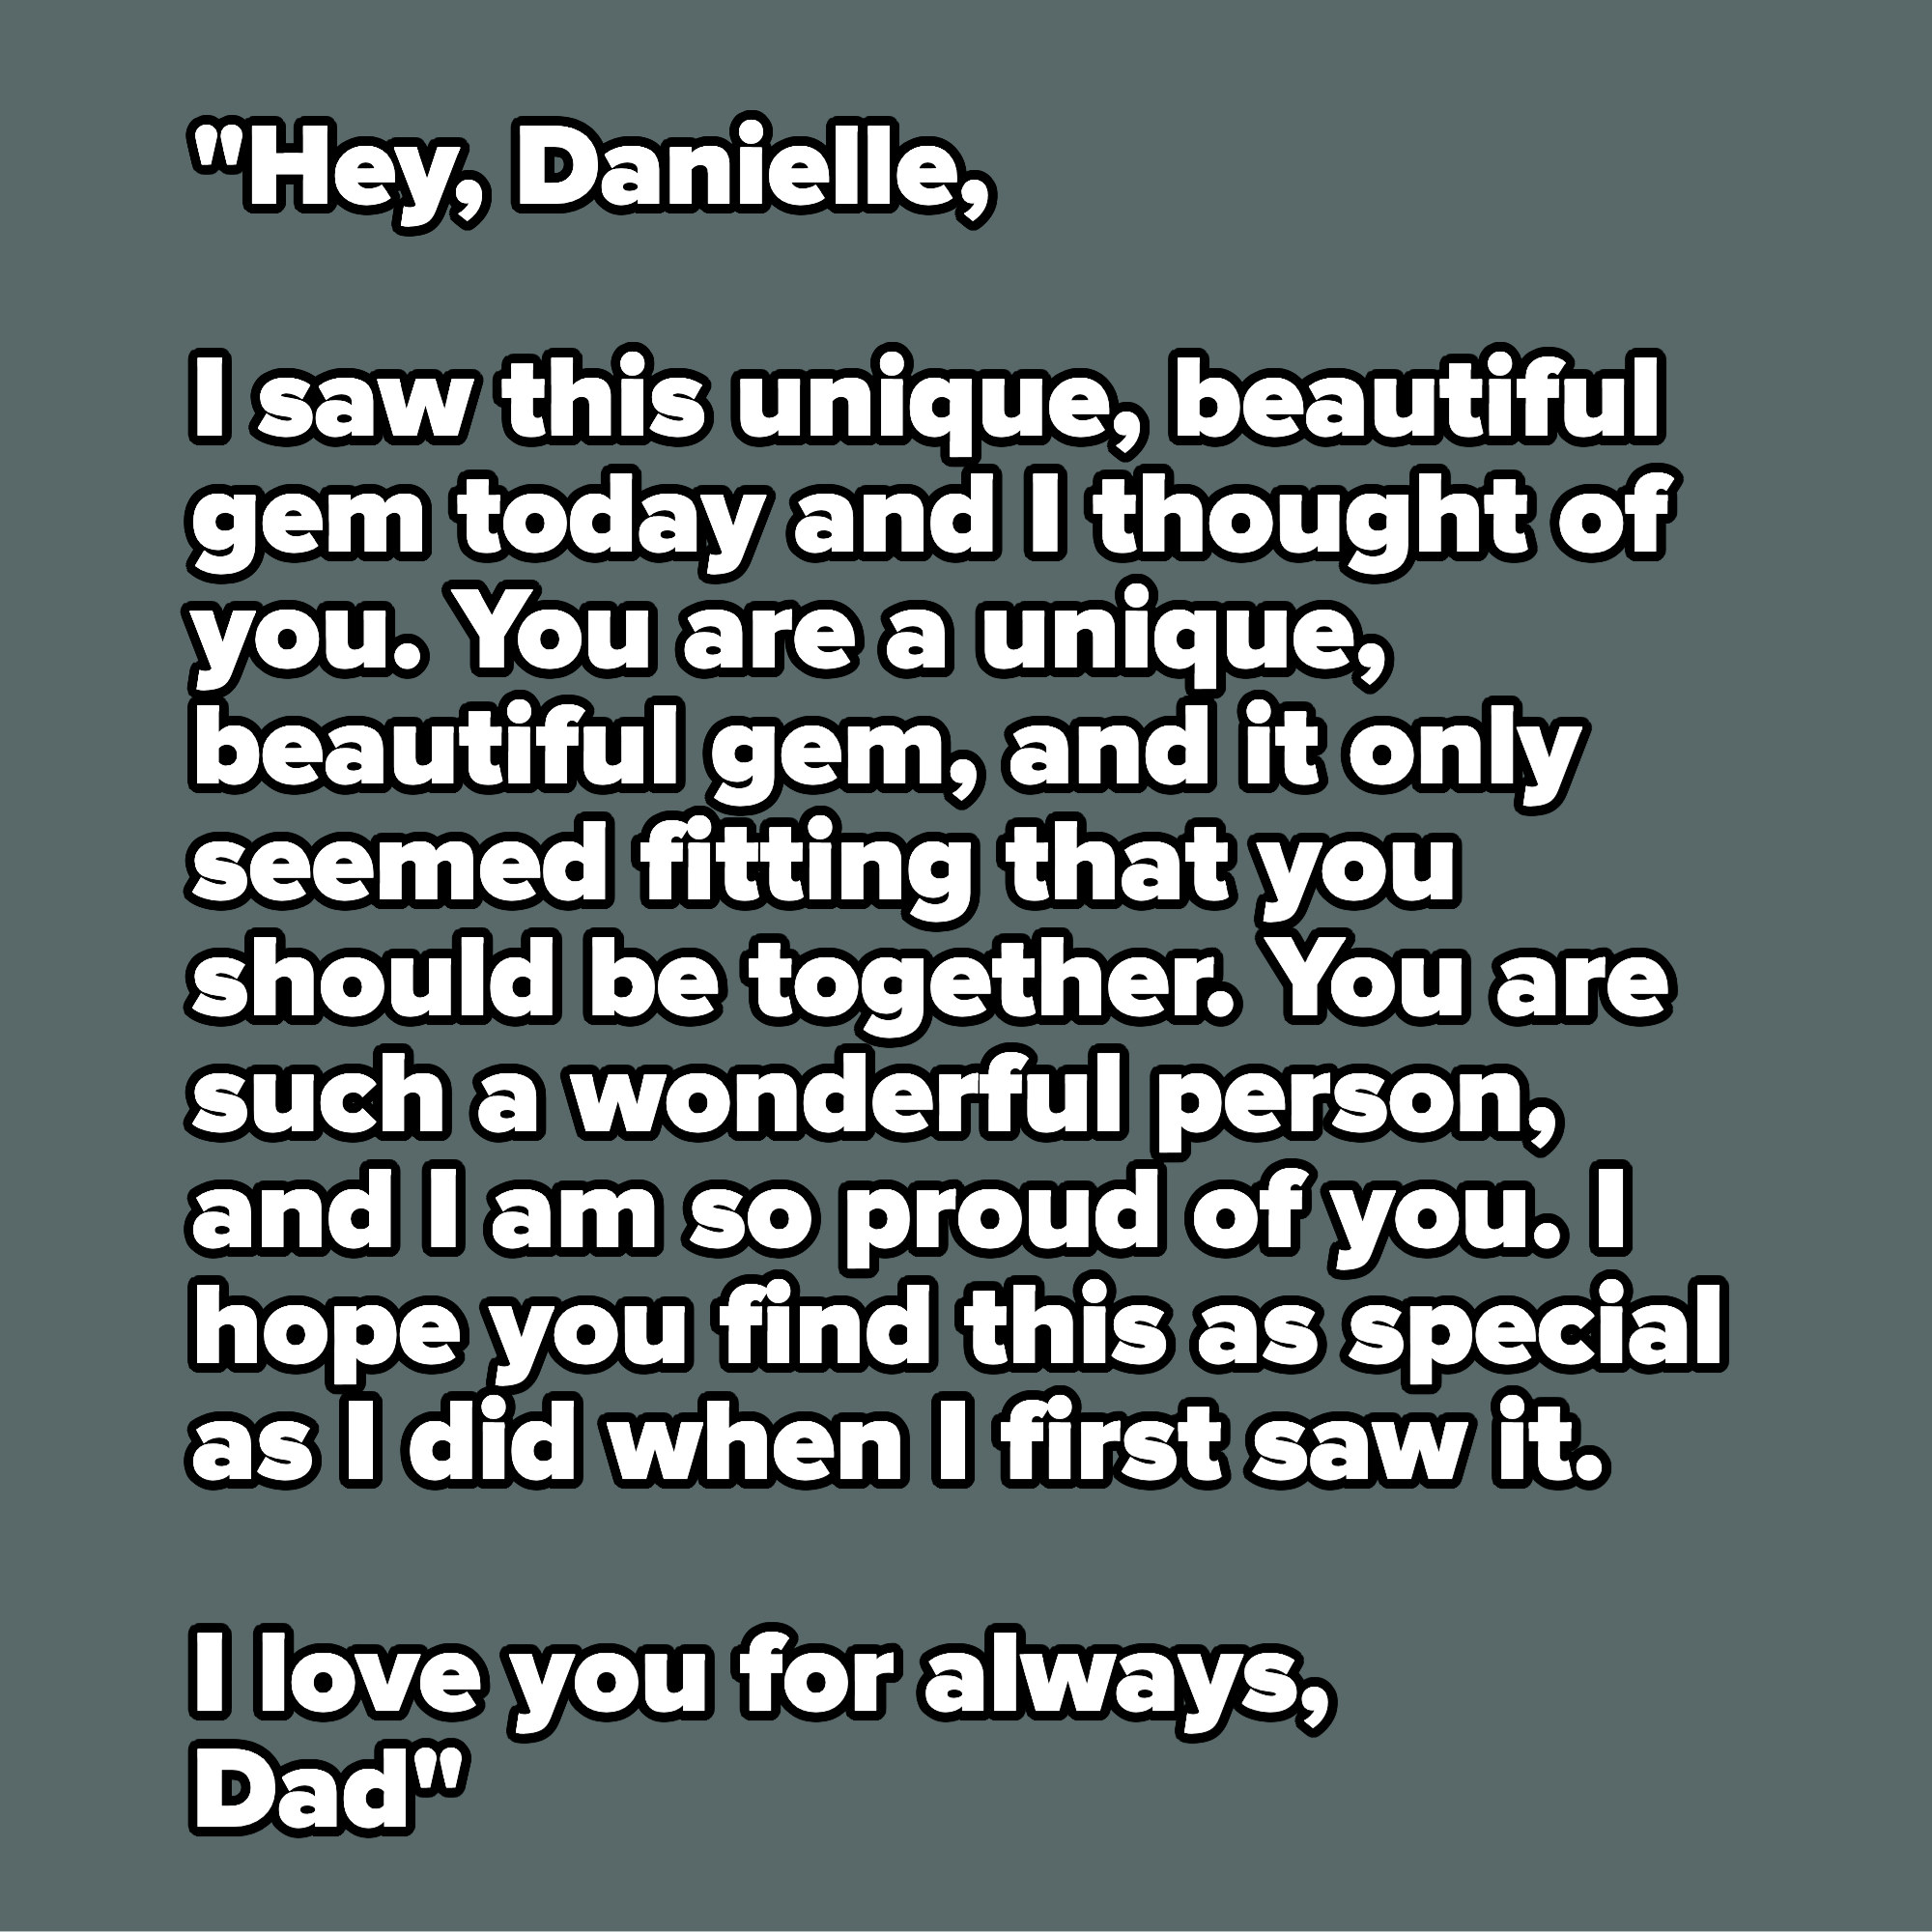 Note from dad: &quot;You are such a wonderful person, and I am so proud of you&quot;